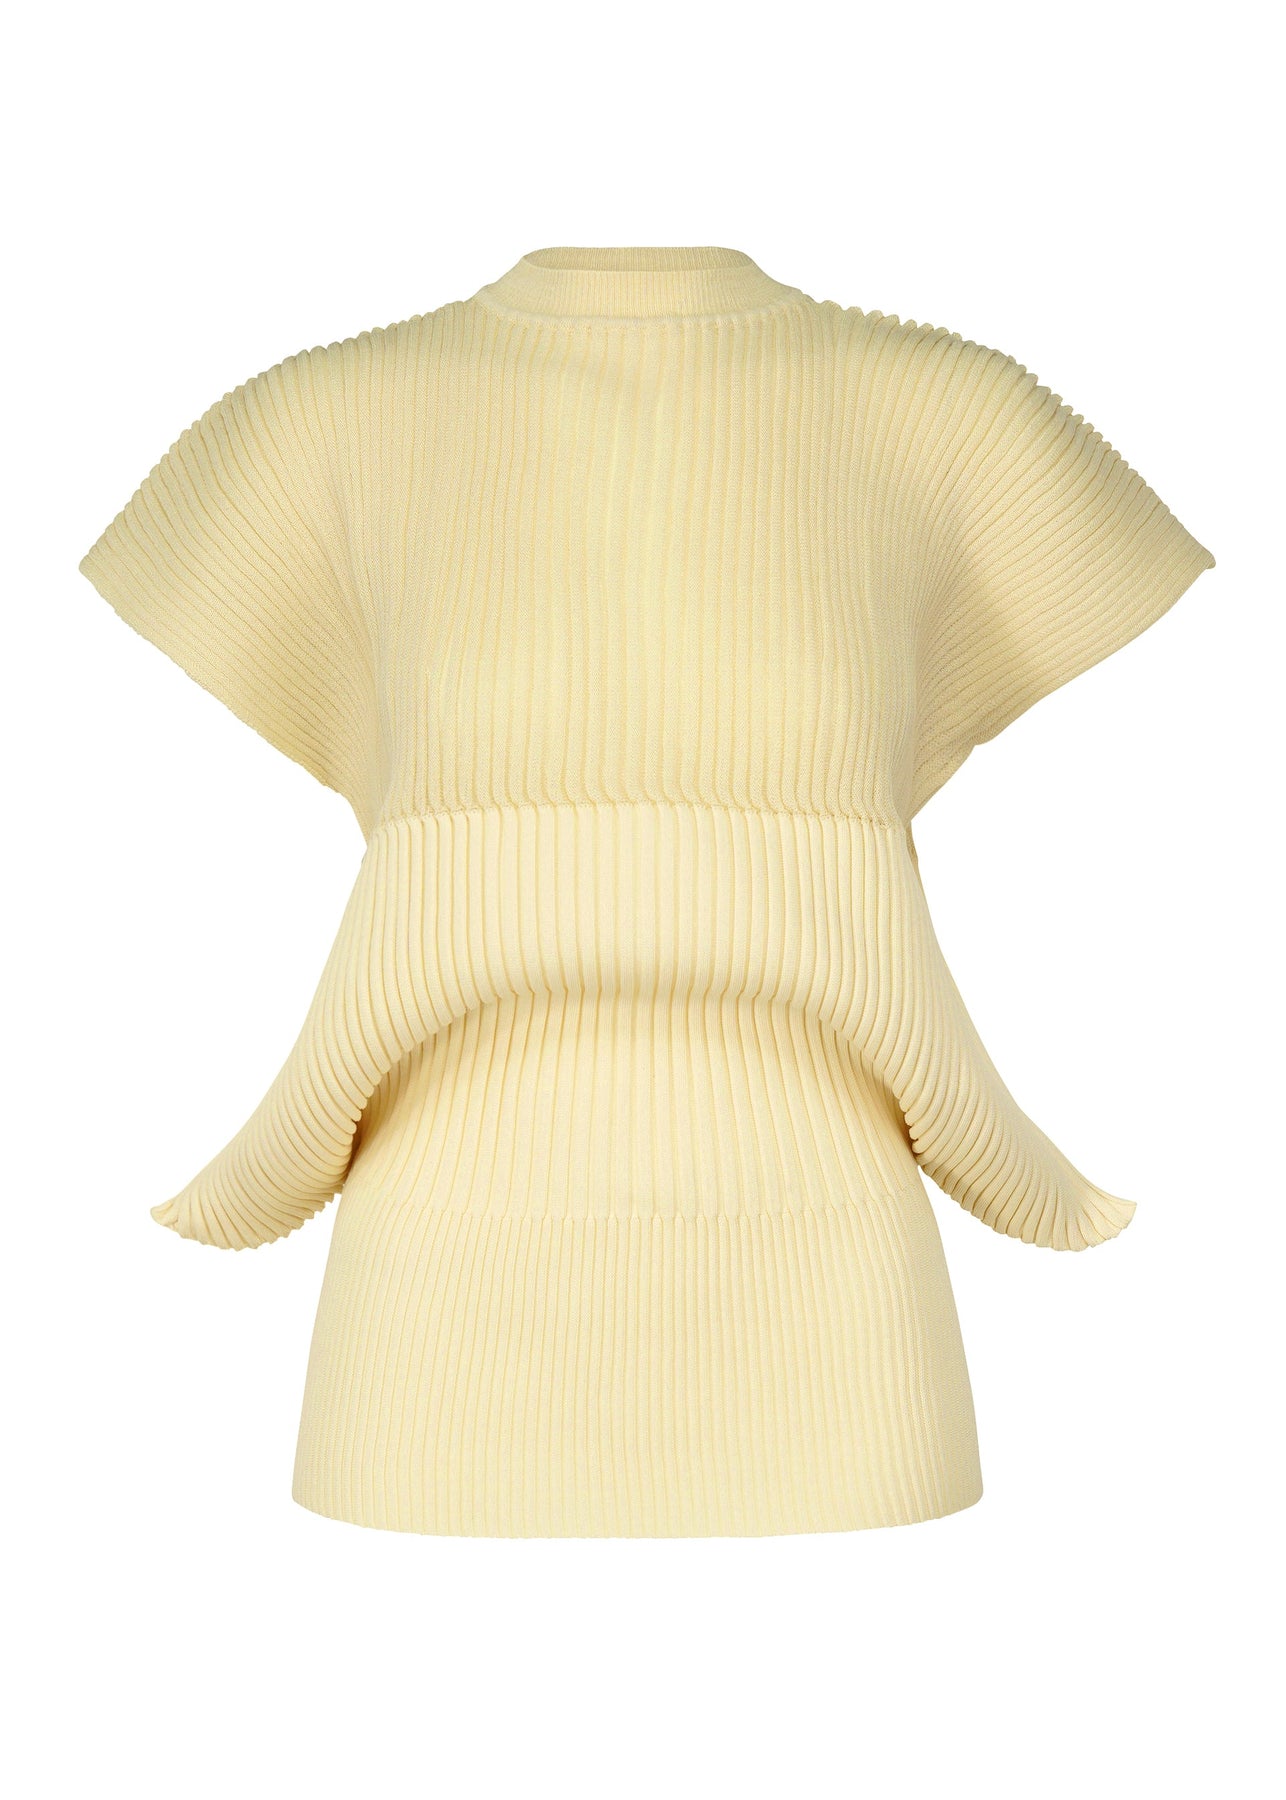 SENSU KNIT TOP | The official ISSEY MIYAKE ONLINE STORE | ISSEY 